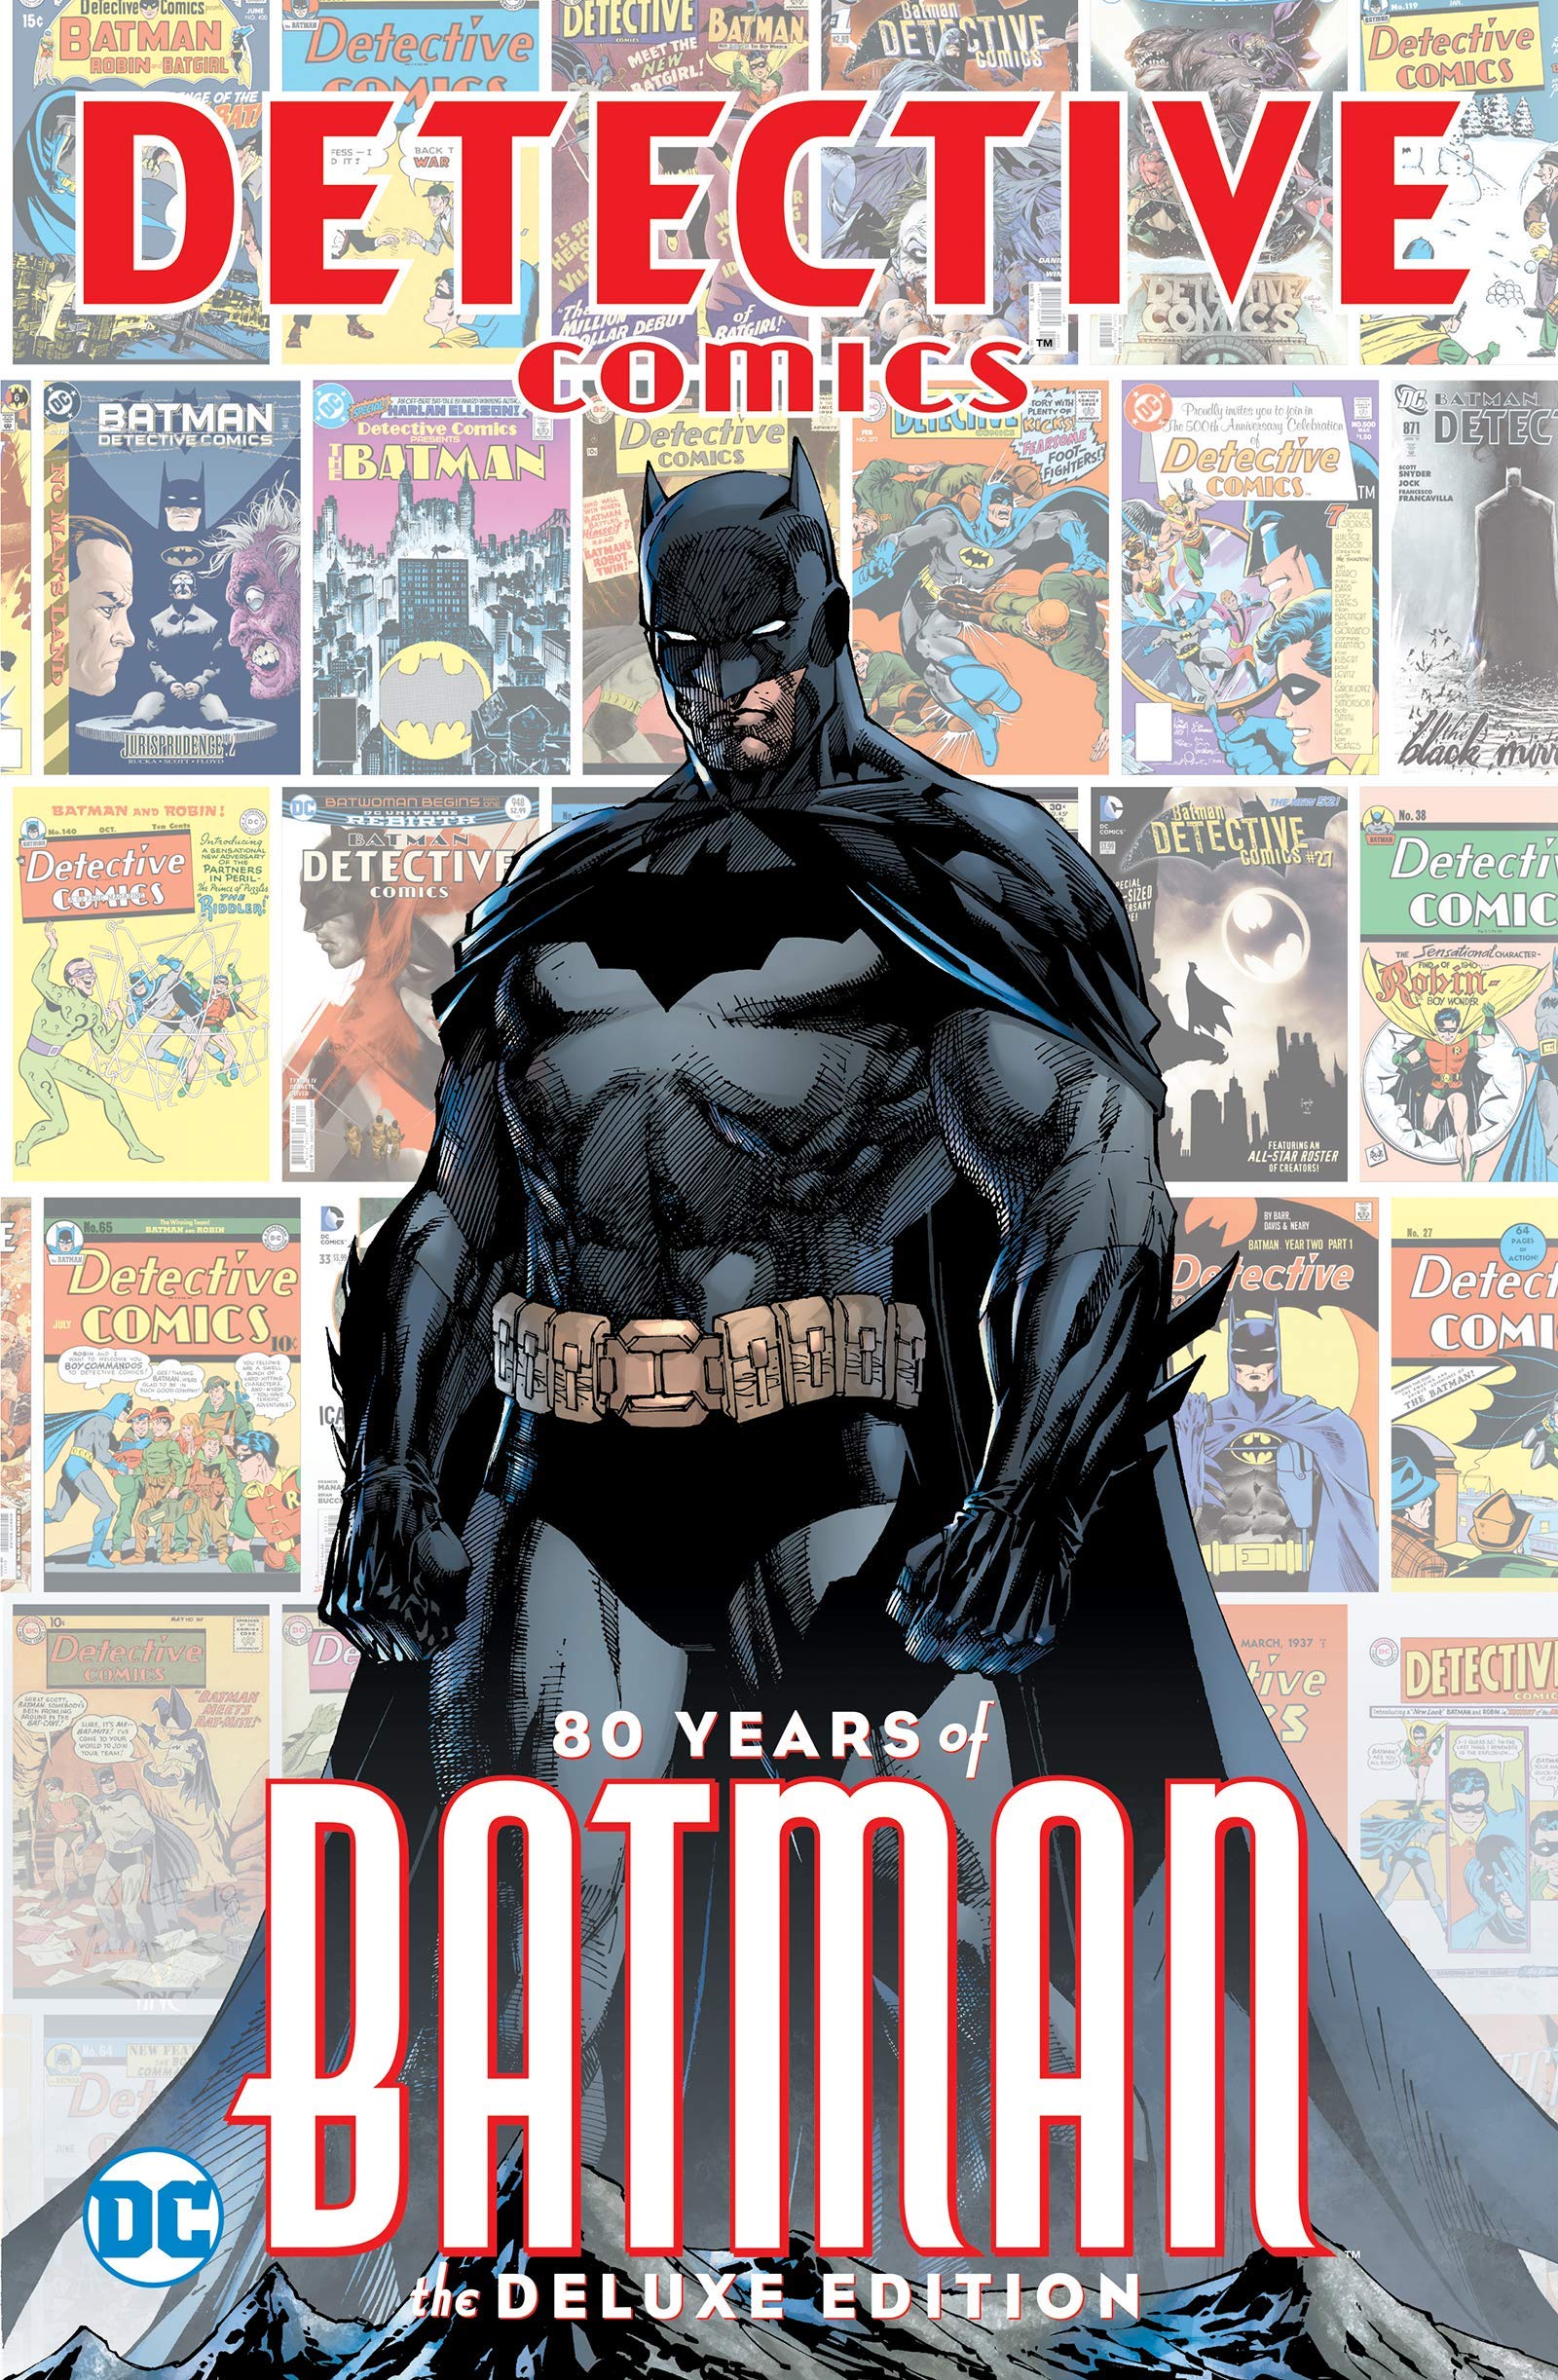 'Detective Comics: 80 Years of Batman - The Deluxe Edition' HC Review